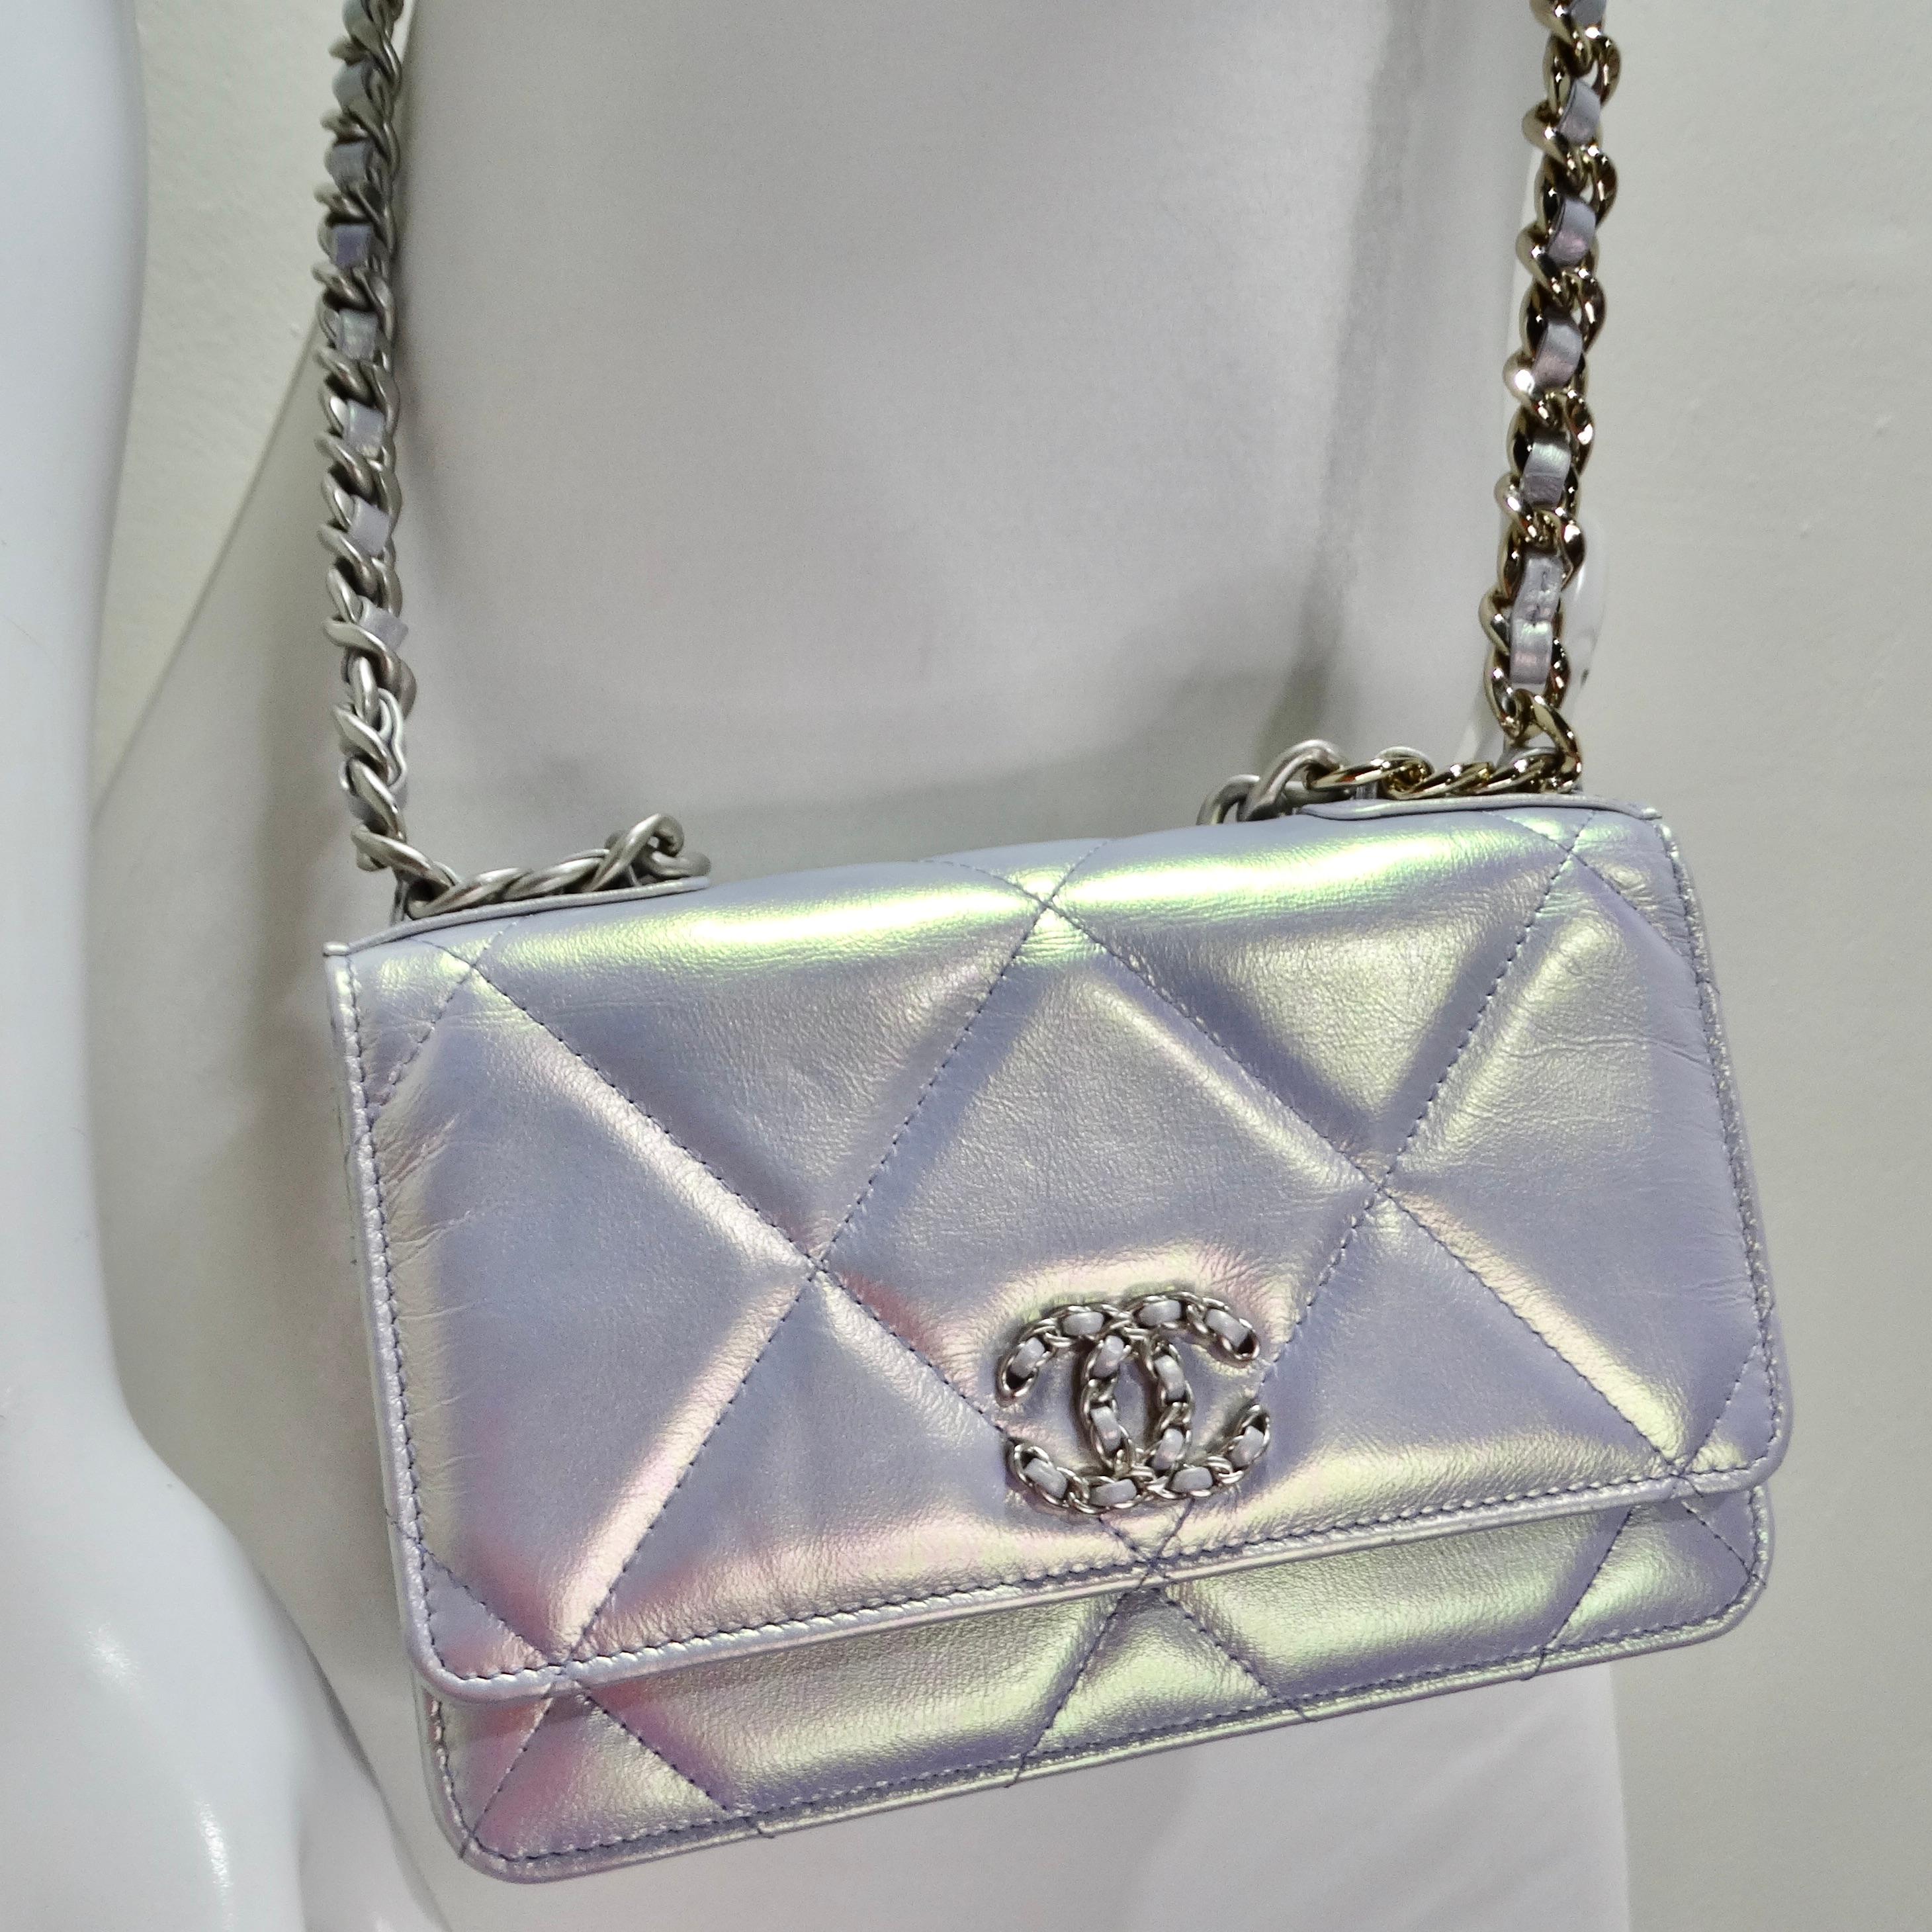 Iridescent Calfskin Quilted Medium Chanel 19 Flap Bag For Sale 14